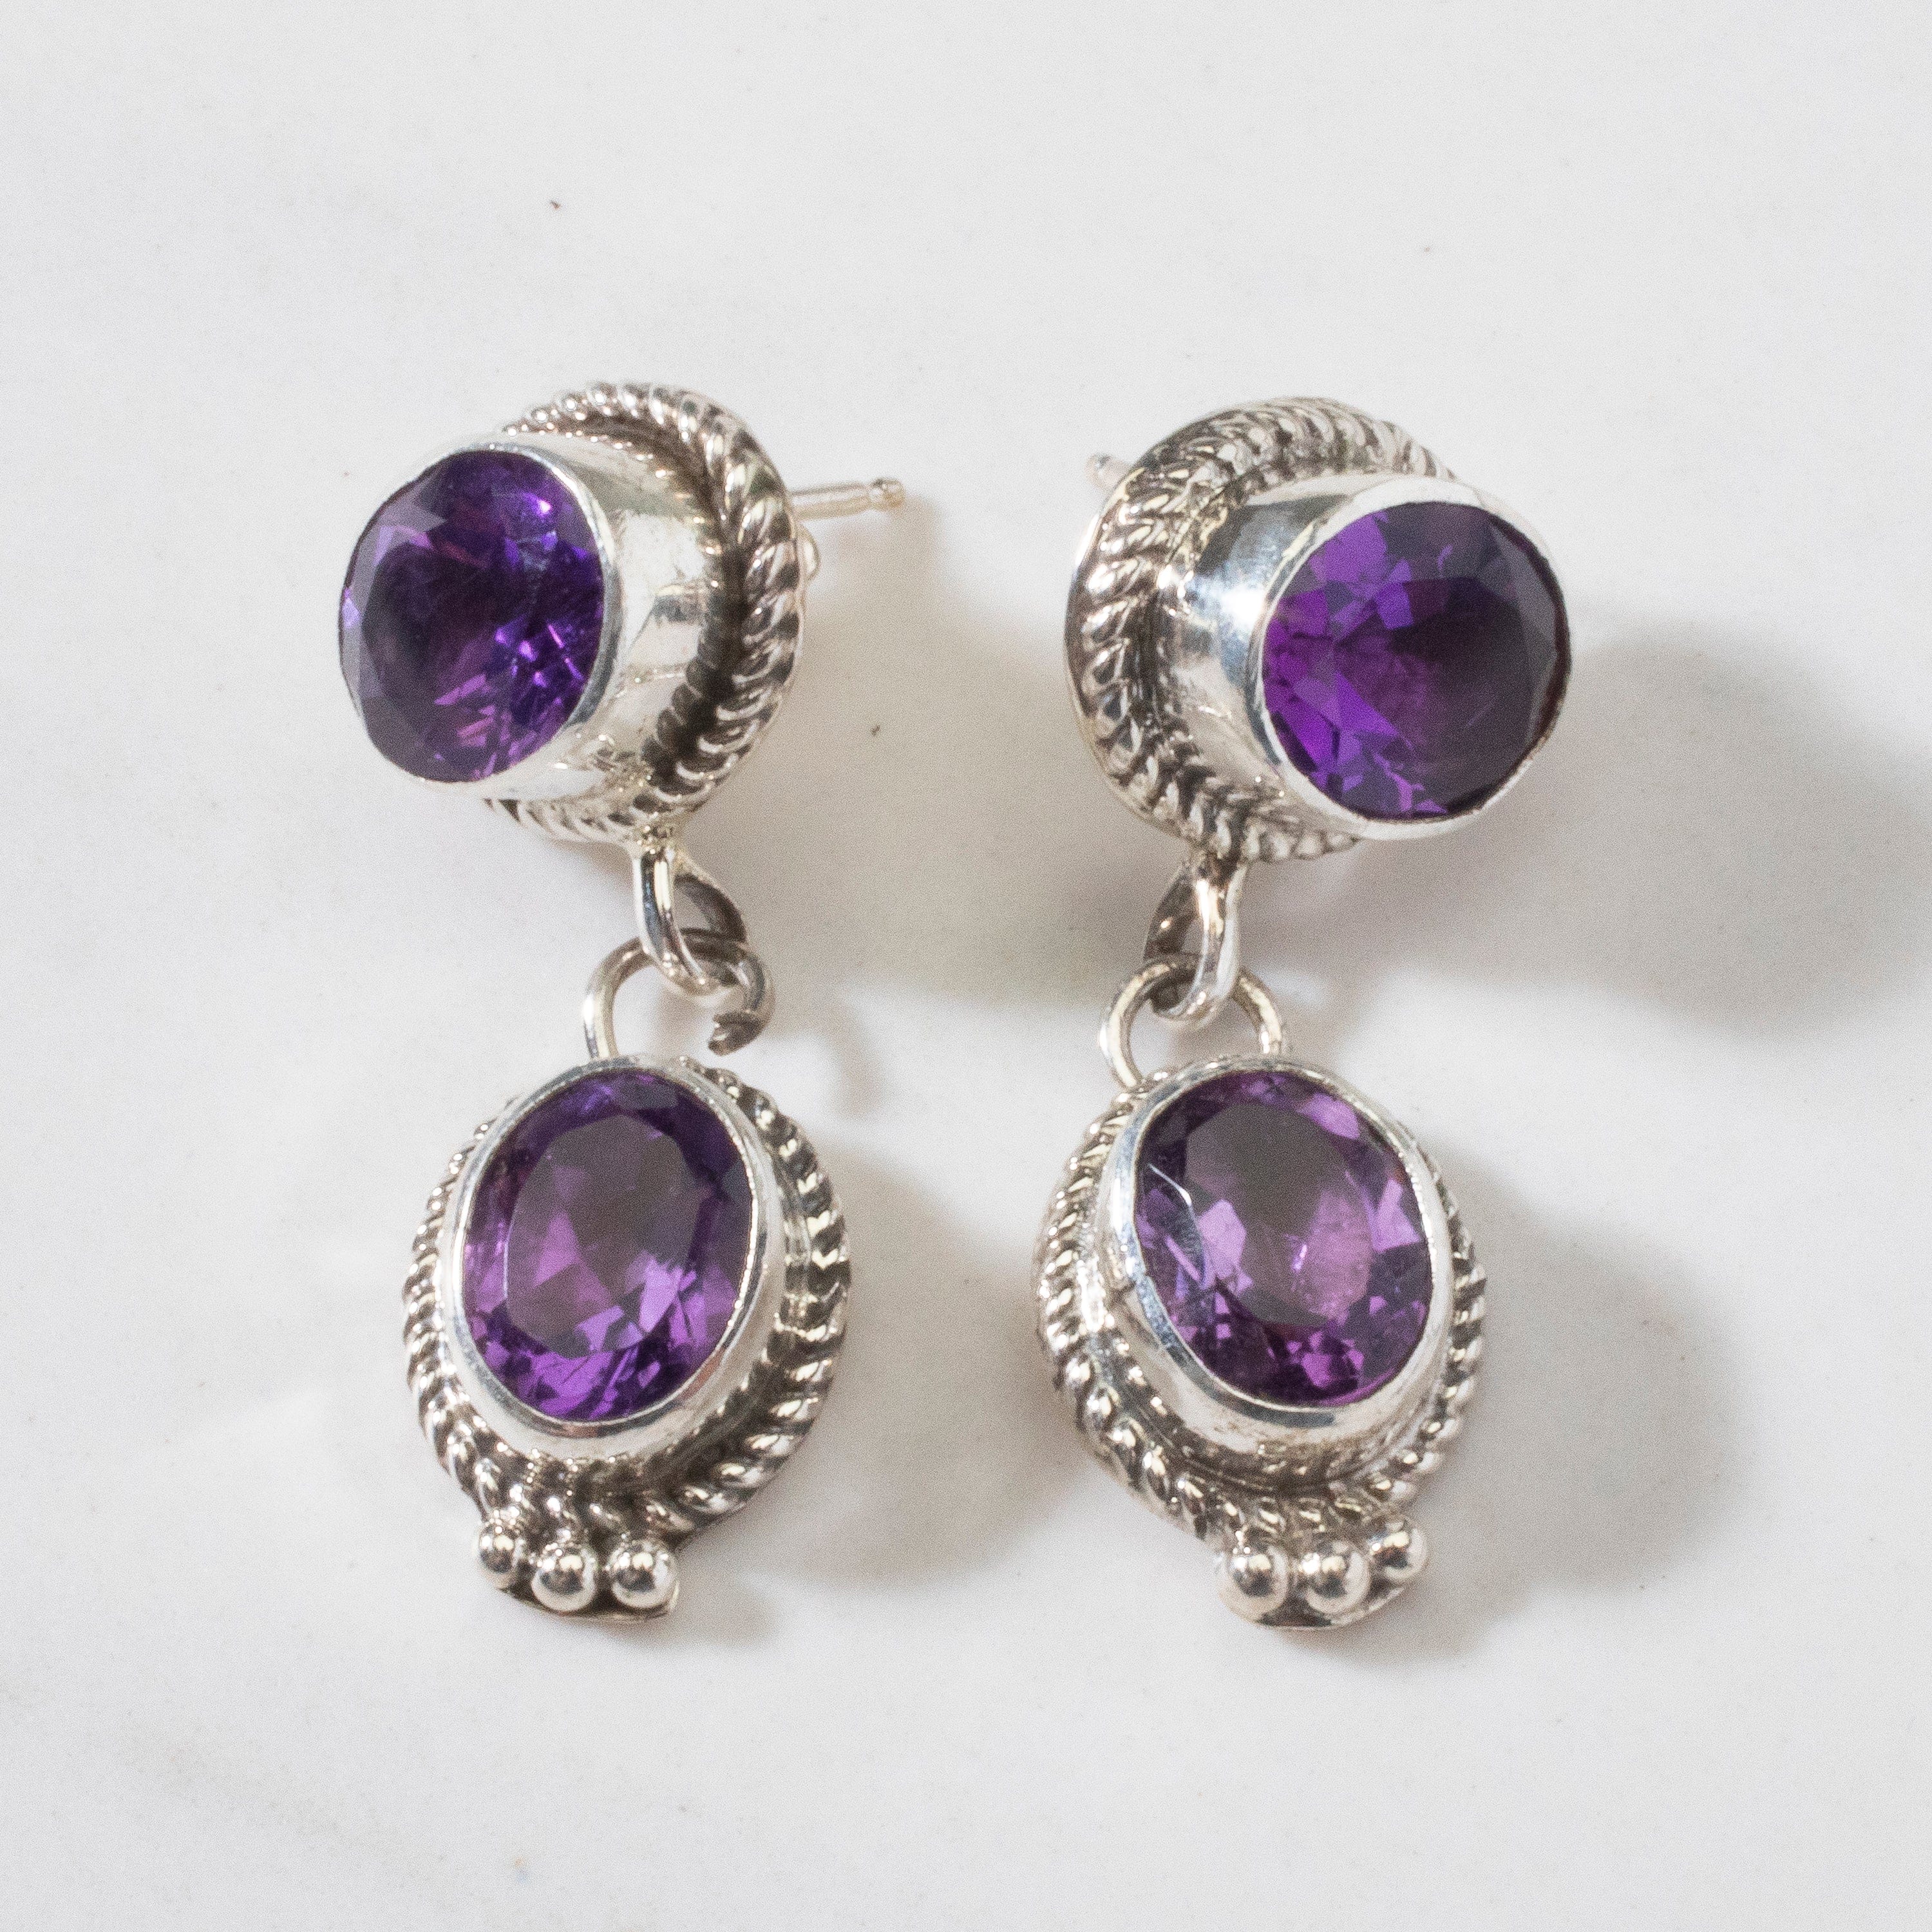 Kalifano Native American Jewelry Amethyst Dangle Navajo USA Native American Made 925 Sterling Silver Earrings with Stud Backing NAE700.008